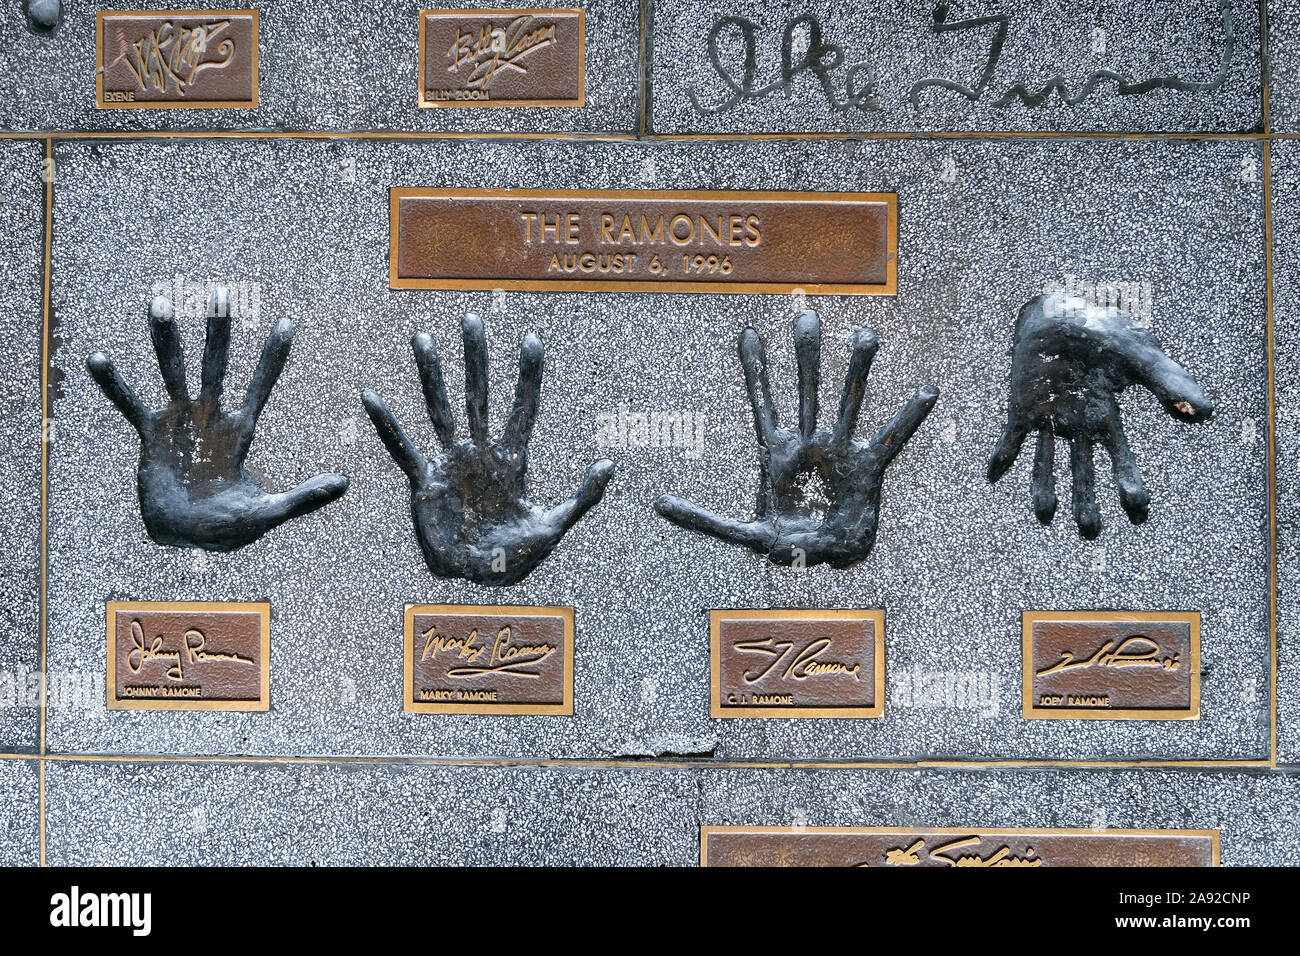 Handprints of the Band The Ramones on the Rock Walk of the Guitar Center Music Store on Sunset Boulevard Hollywood, Los Angeles, California, USA Stock Photo